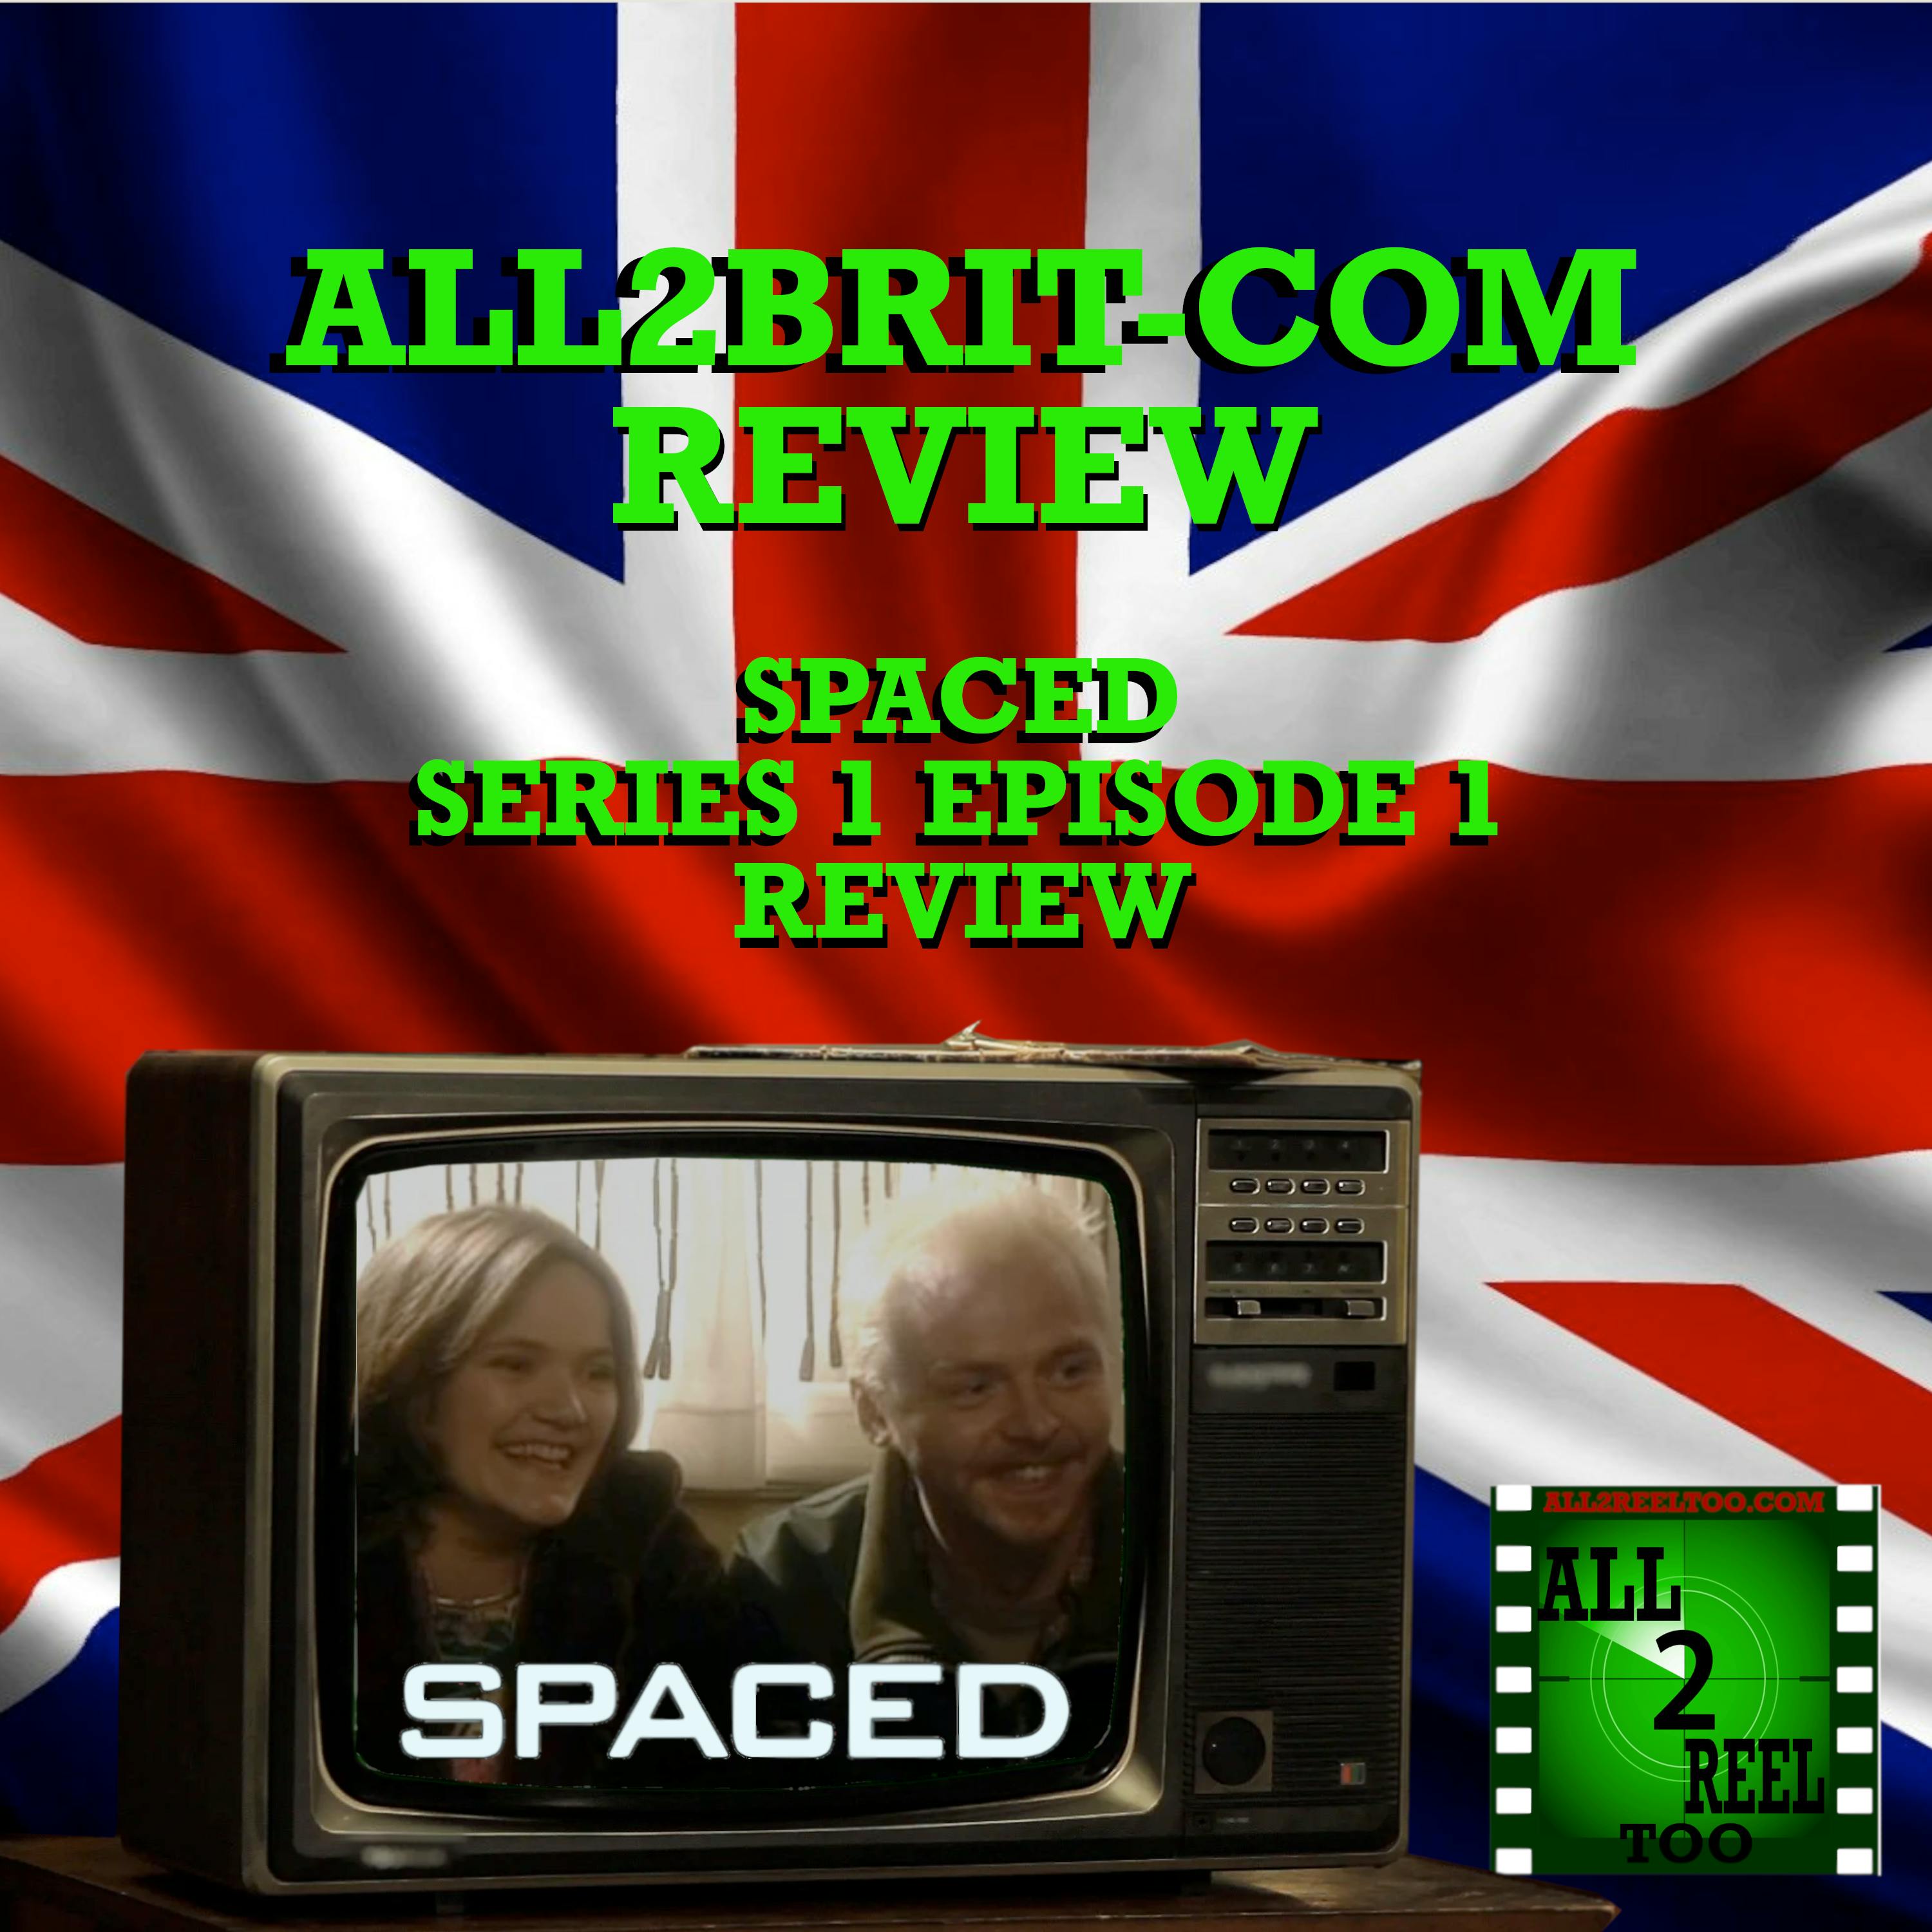 Spaced - Beginnings  (TV Episode 1999) S1EP1- All2Brit-com Review